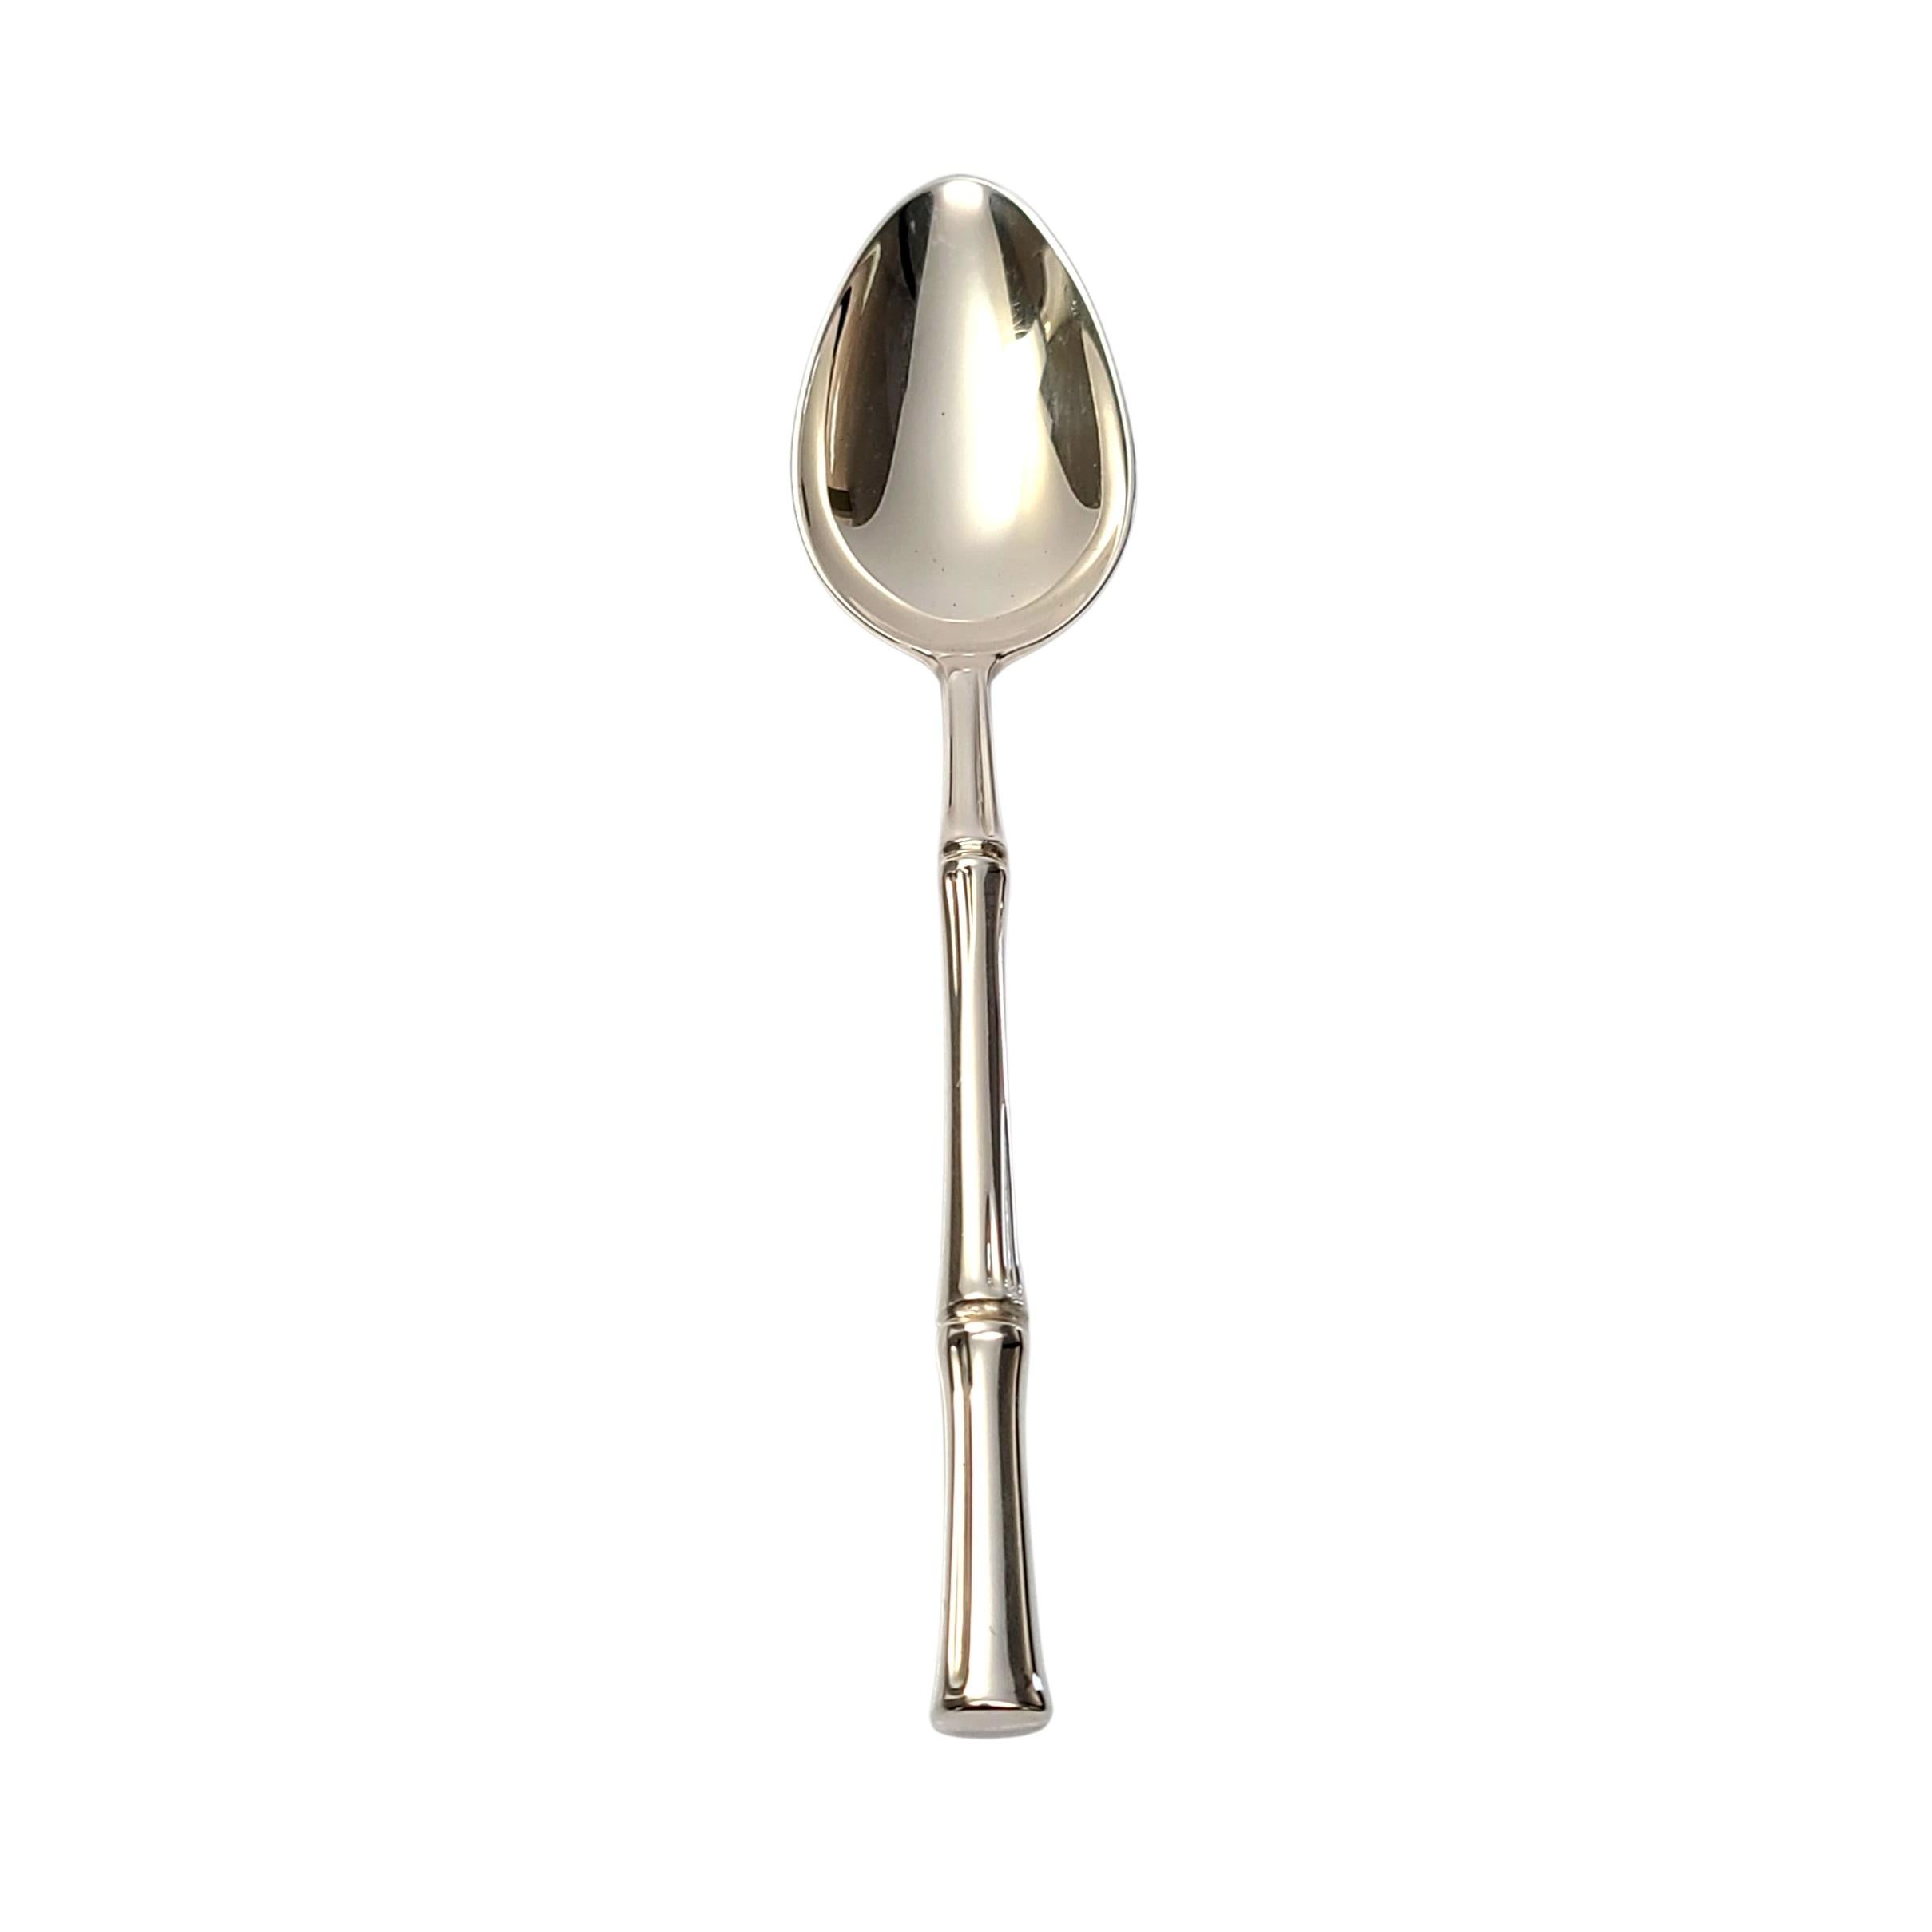 Sterling silver dessert/oval soup spoon by Tiffany & Co in the Bamboo pattern.

No monogram

Introduced in 1961, the mid-century design of the Bamboo pattern is still in demand today. This spoon is a beautiful, heavy and substantial piece. Tiffany &